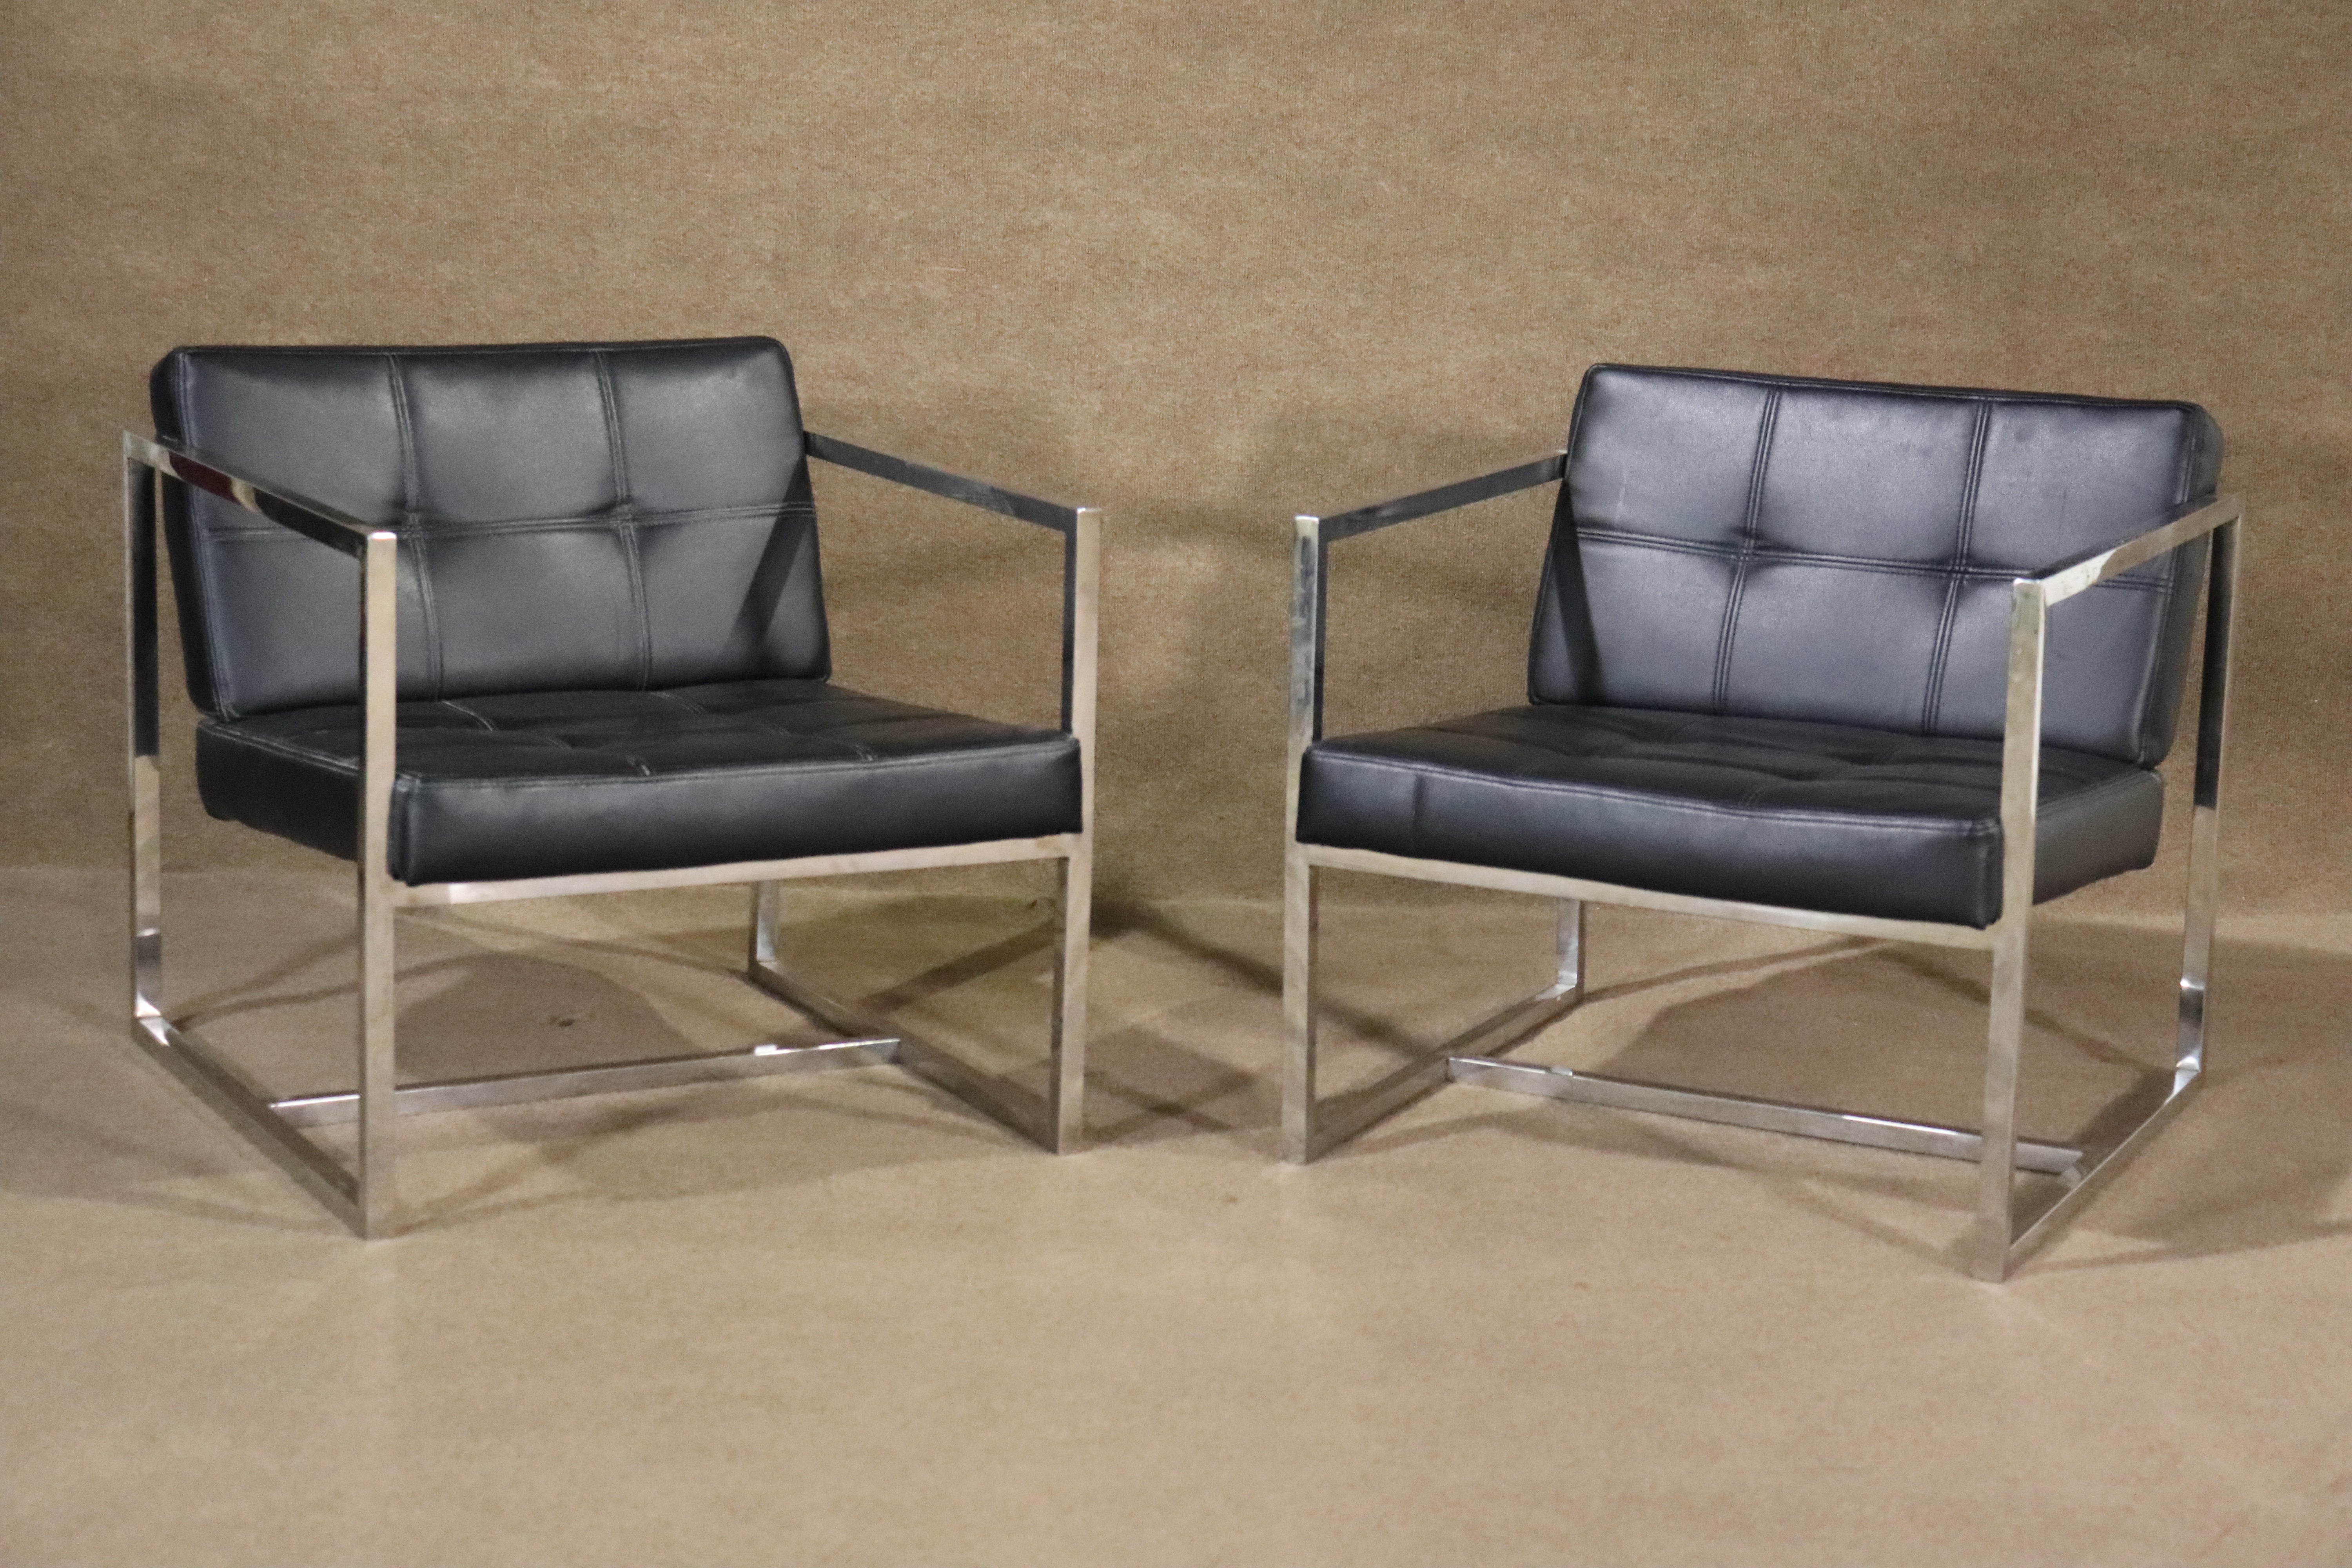 Bring home this gorgeous blend of form and function with two elegant polished chrome and leather lounge chairs. With a robust polished chrome base and tufted leather to boot, these leather chairs are a great fit for home or office. 

Please confirm